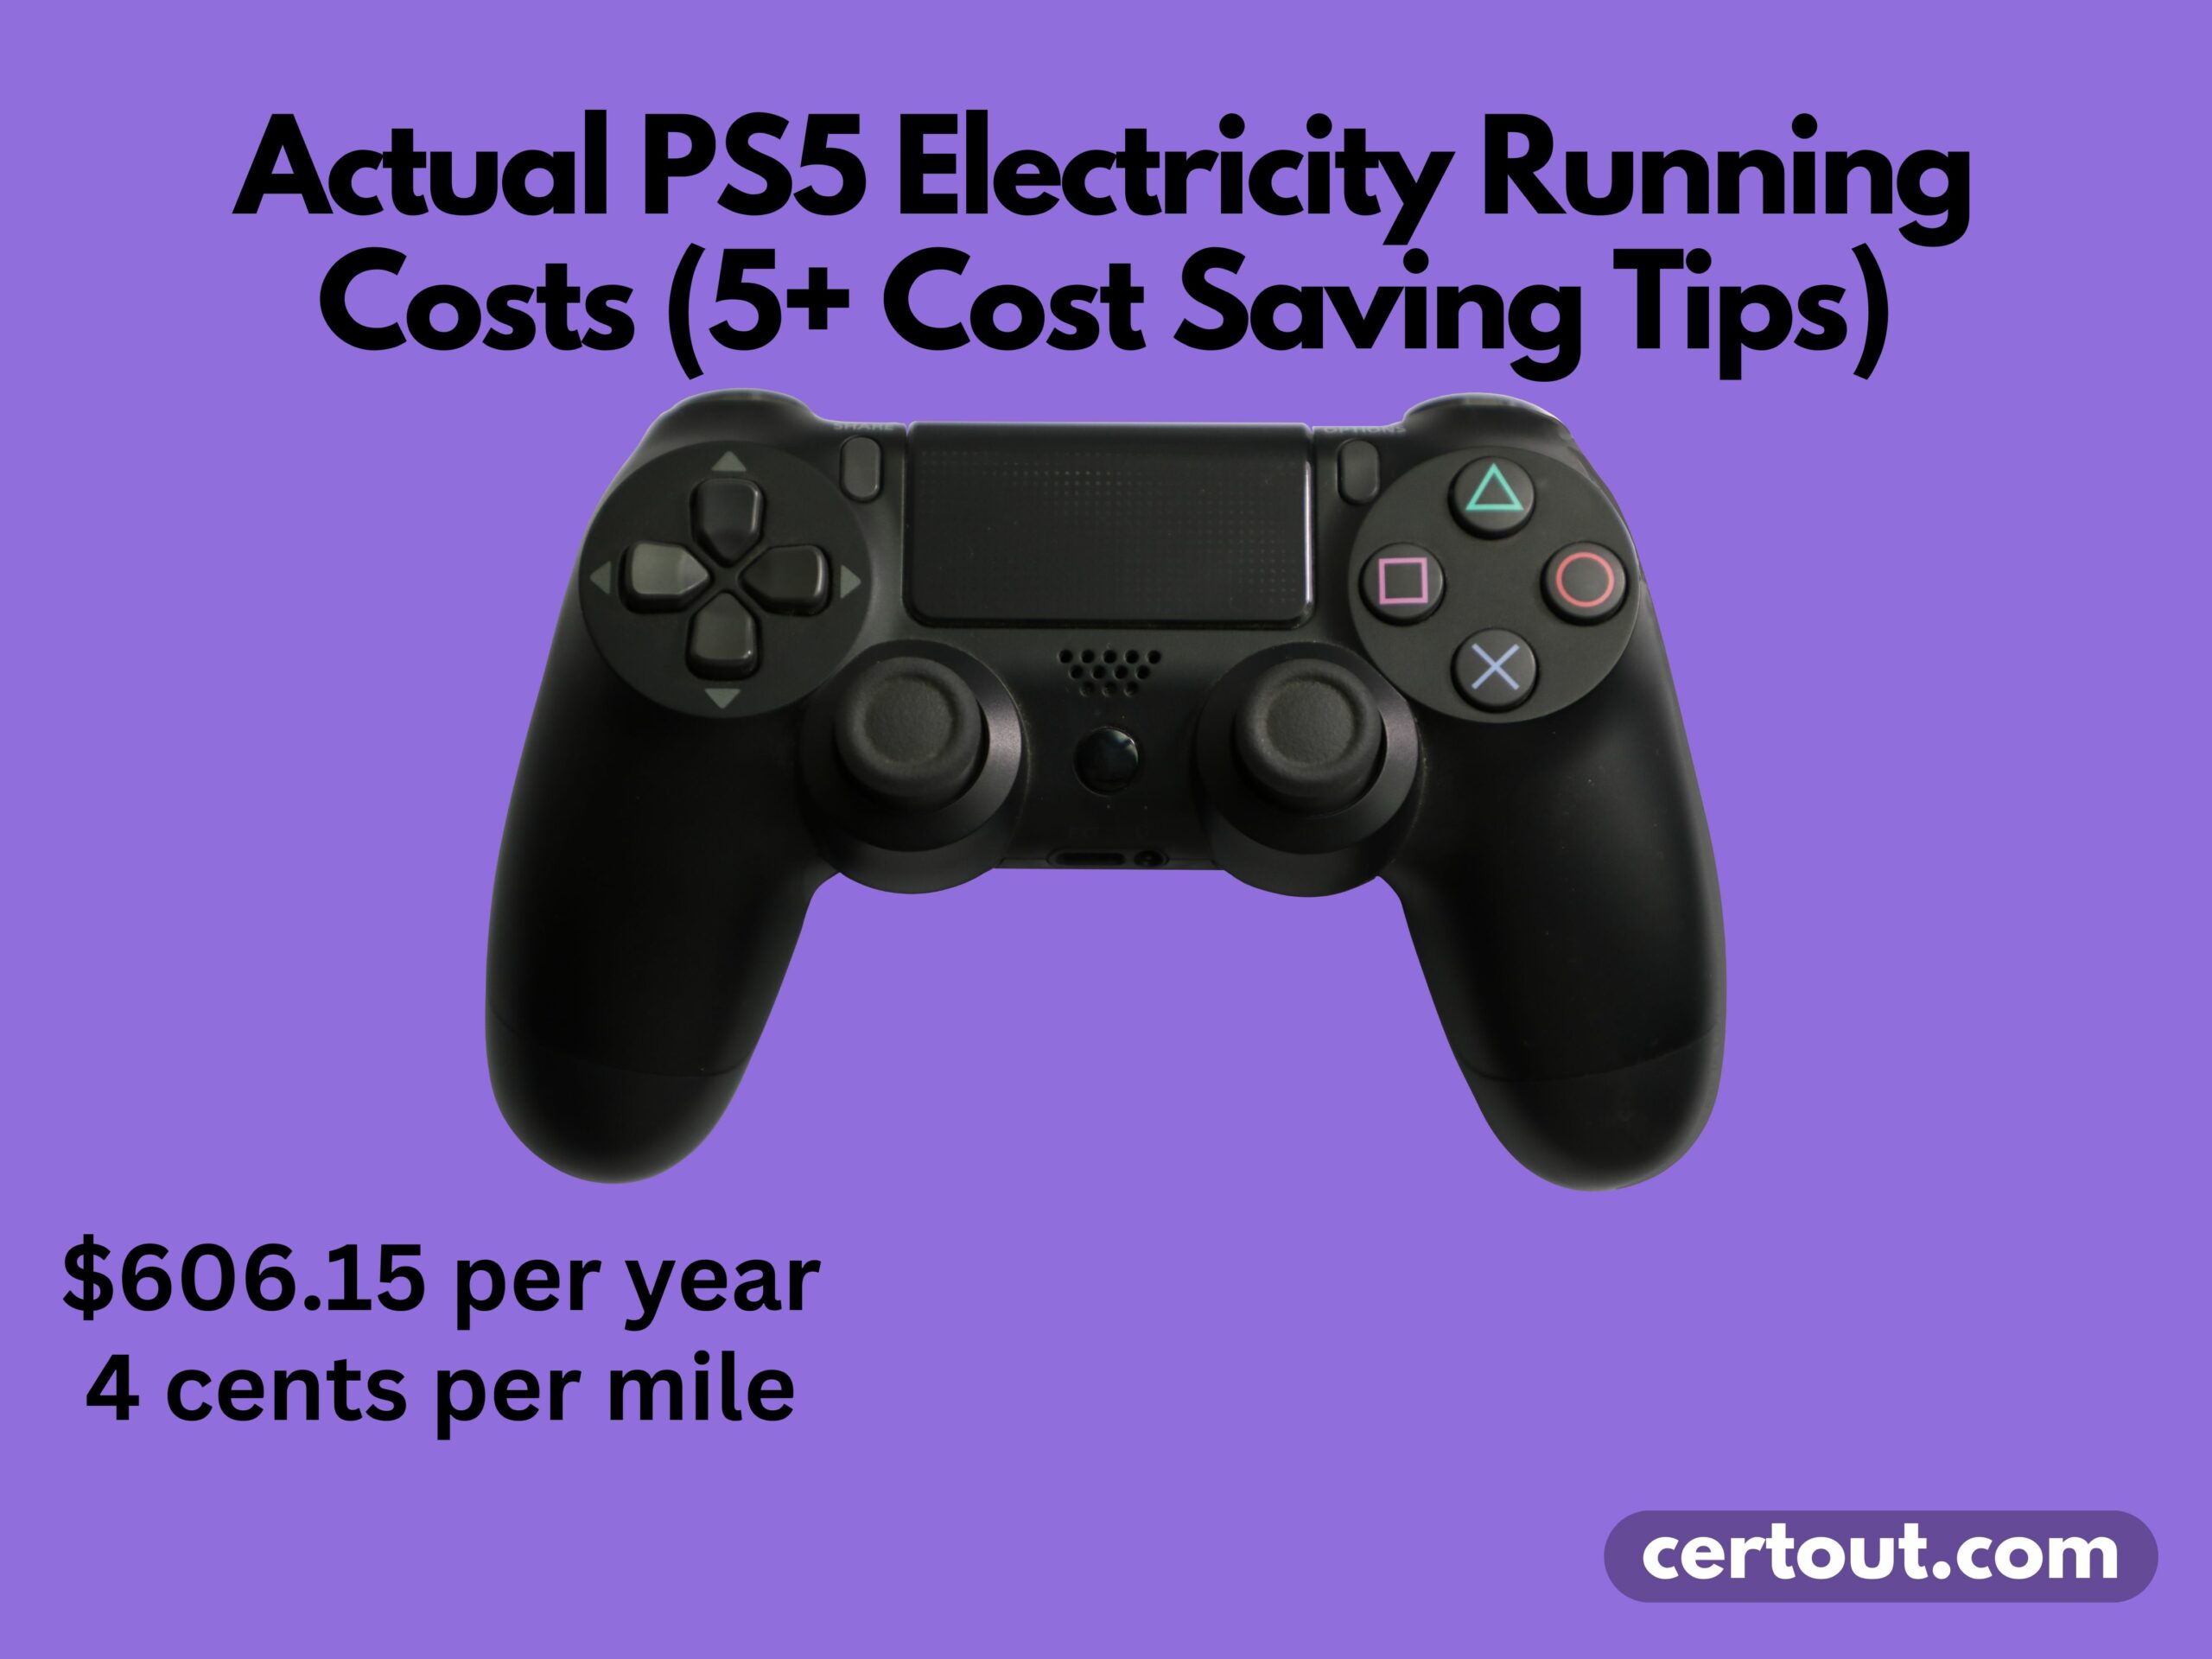 PS5 Electricity Running Costs